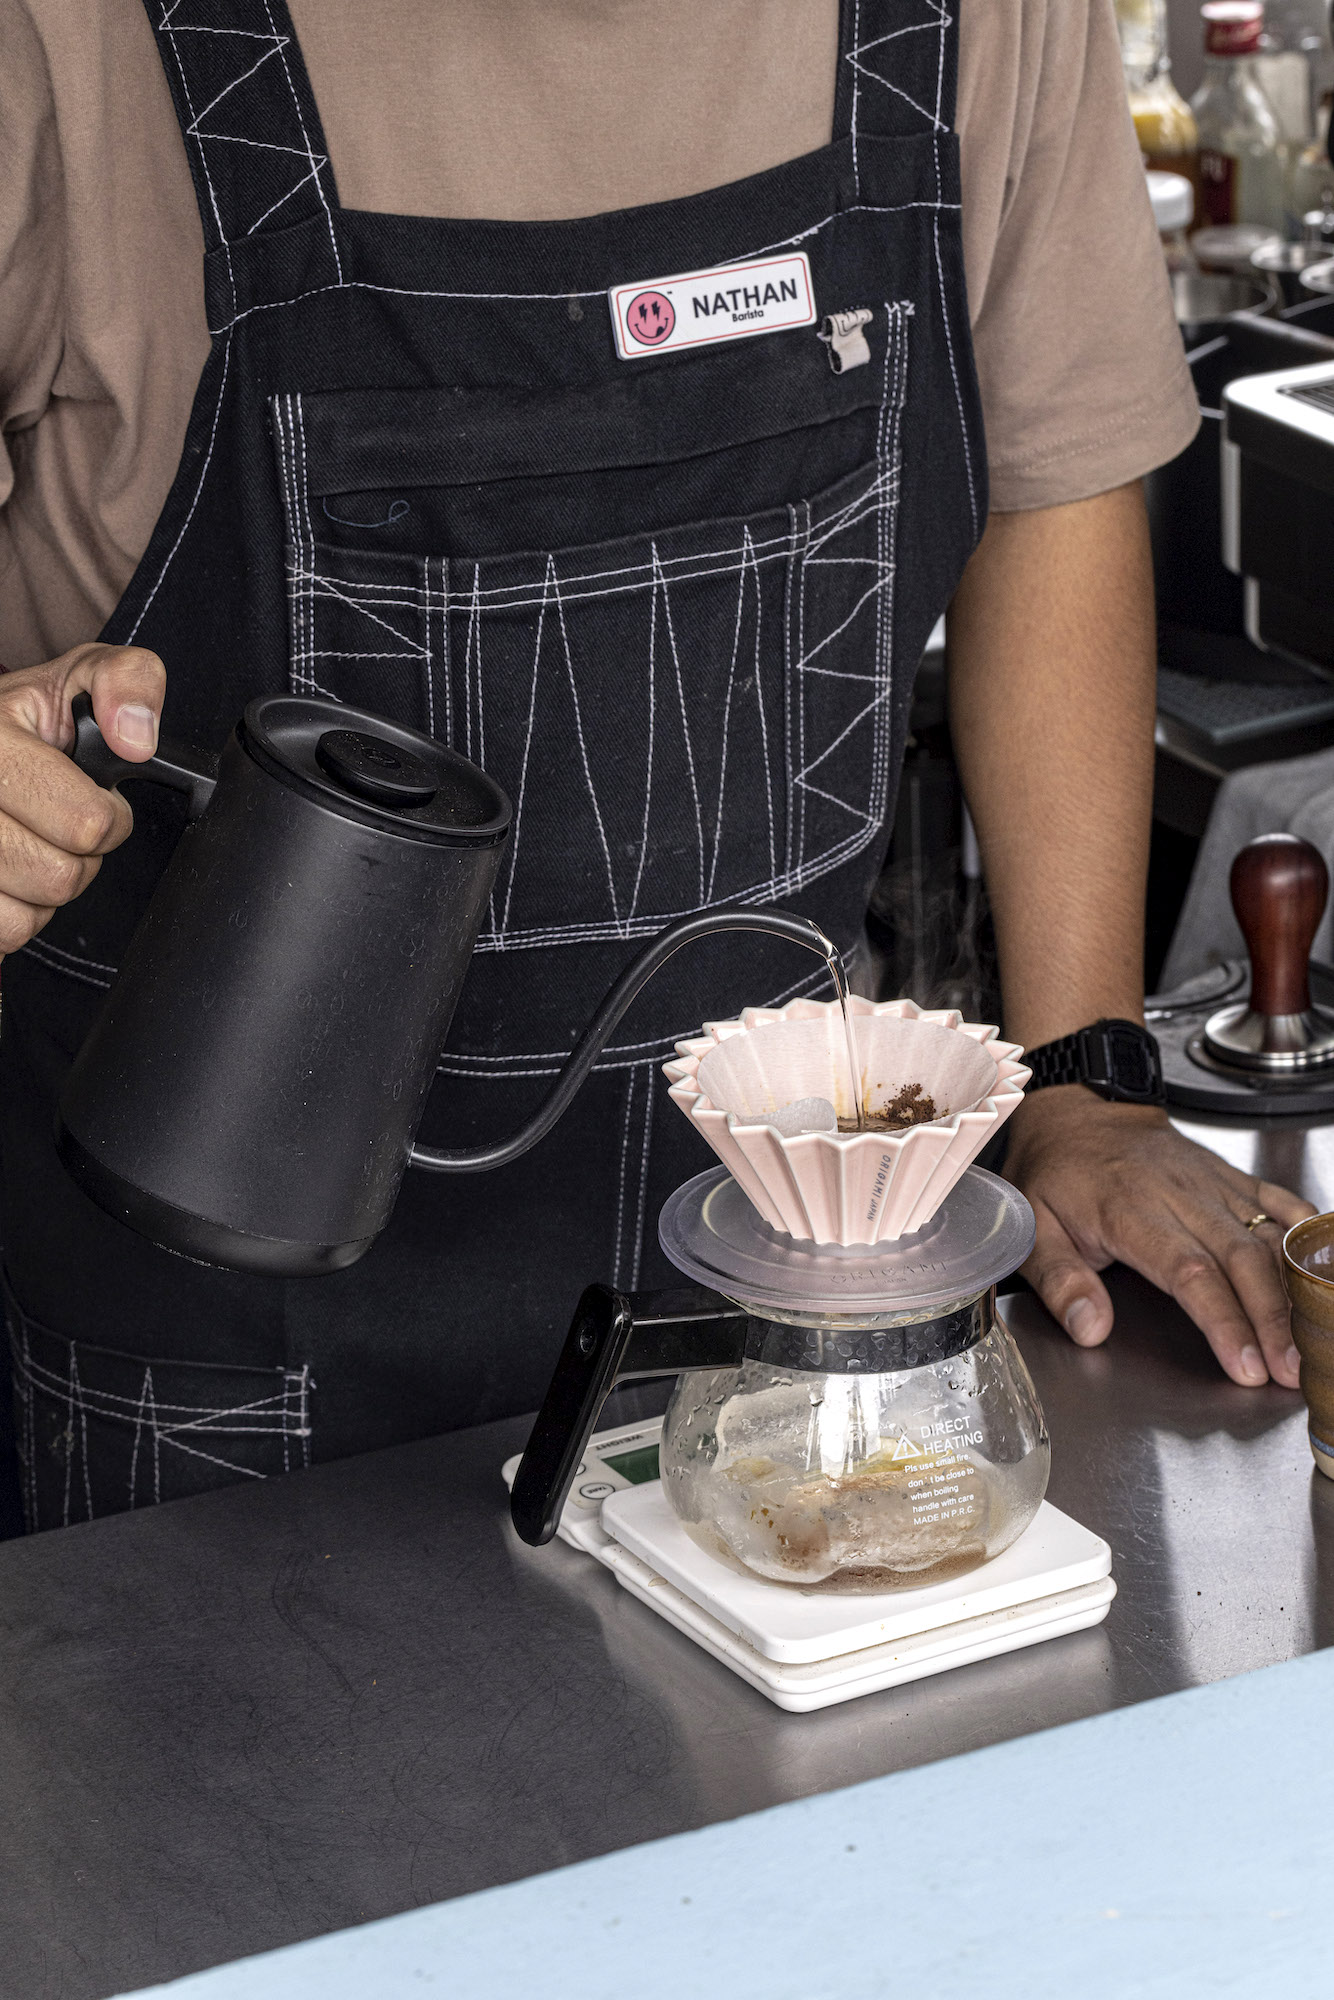 A closer look at their pour-over coffee process and chic aprons